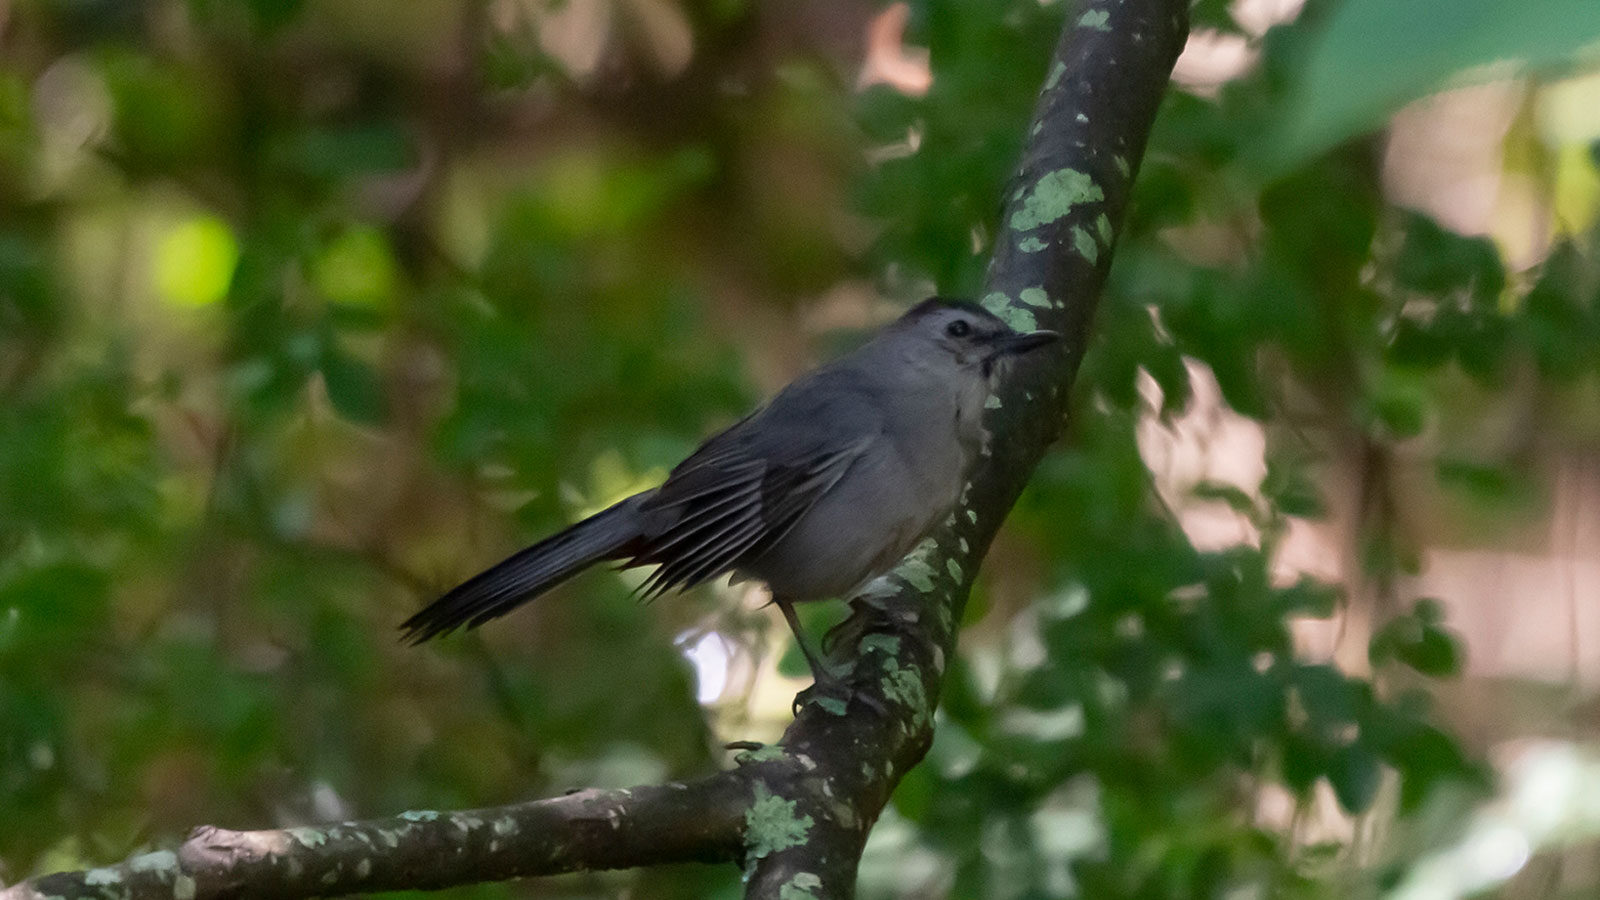 Gray catbird looking out from its perch on a branch